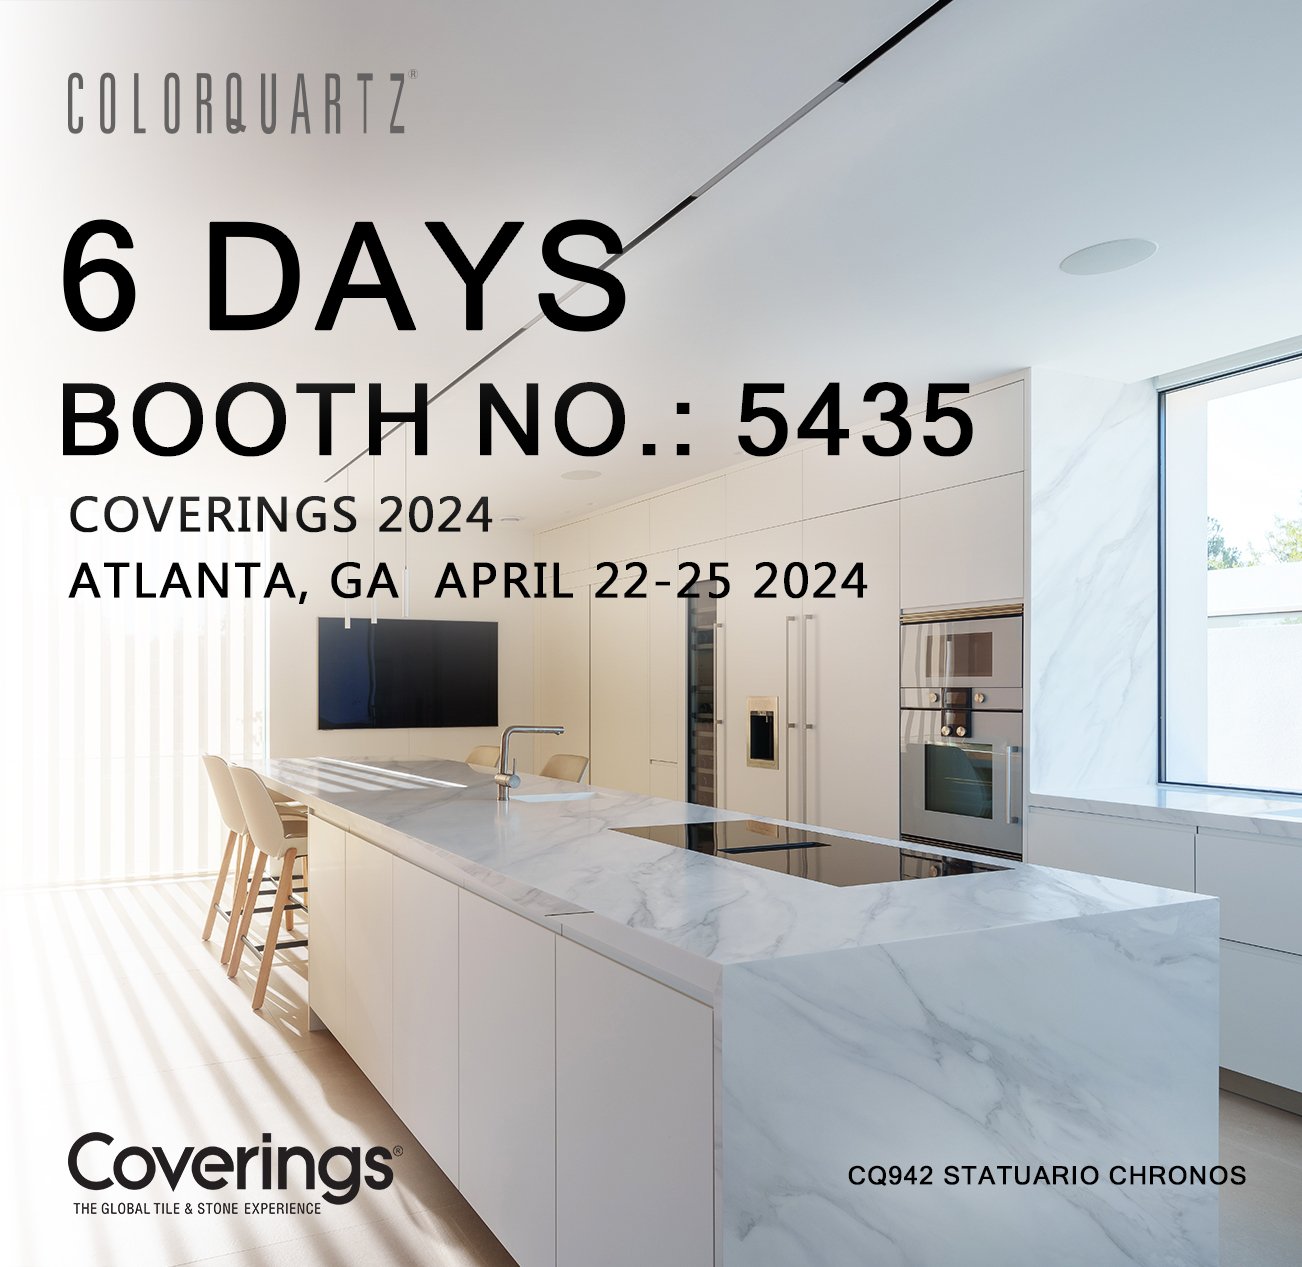 Time's ticking! Just 6 days until Coverings 2024 kicks off. Visit Booth 5435 to dive into our 2024 new collection and meet our team of experts. Let's make your design dreams a reality! #Colorquartz #Booth5435 #coverings2024